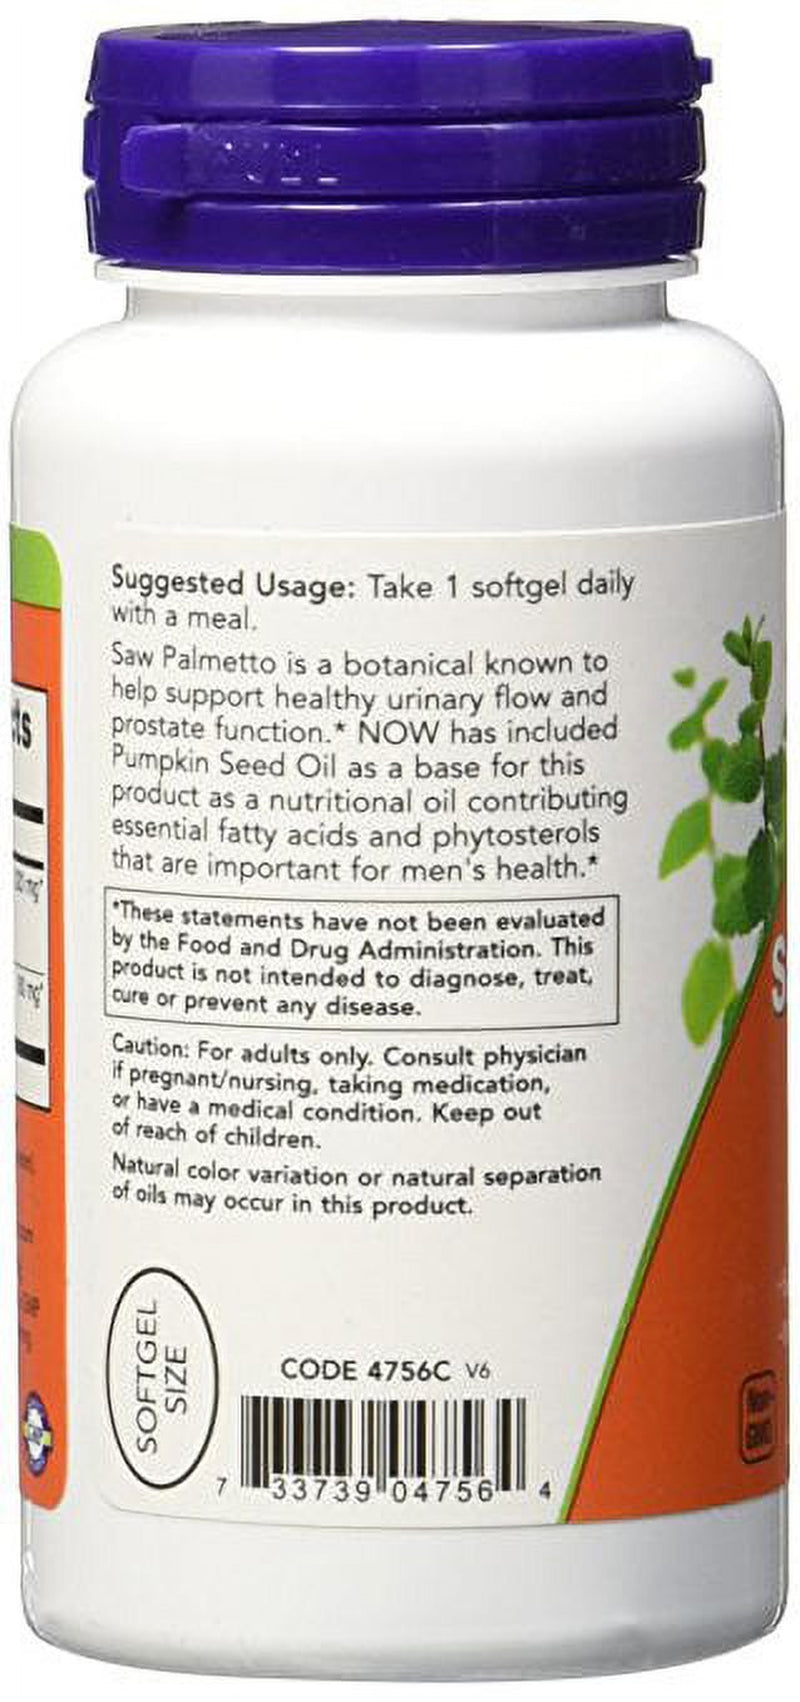 Now Foods - Saw Palmetto Extract 320 Mg 90 Veggie Softgels (Pack of 2)